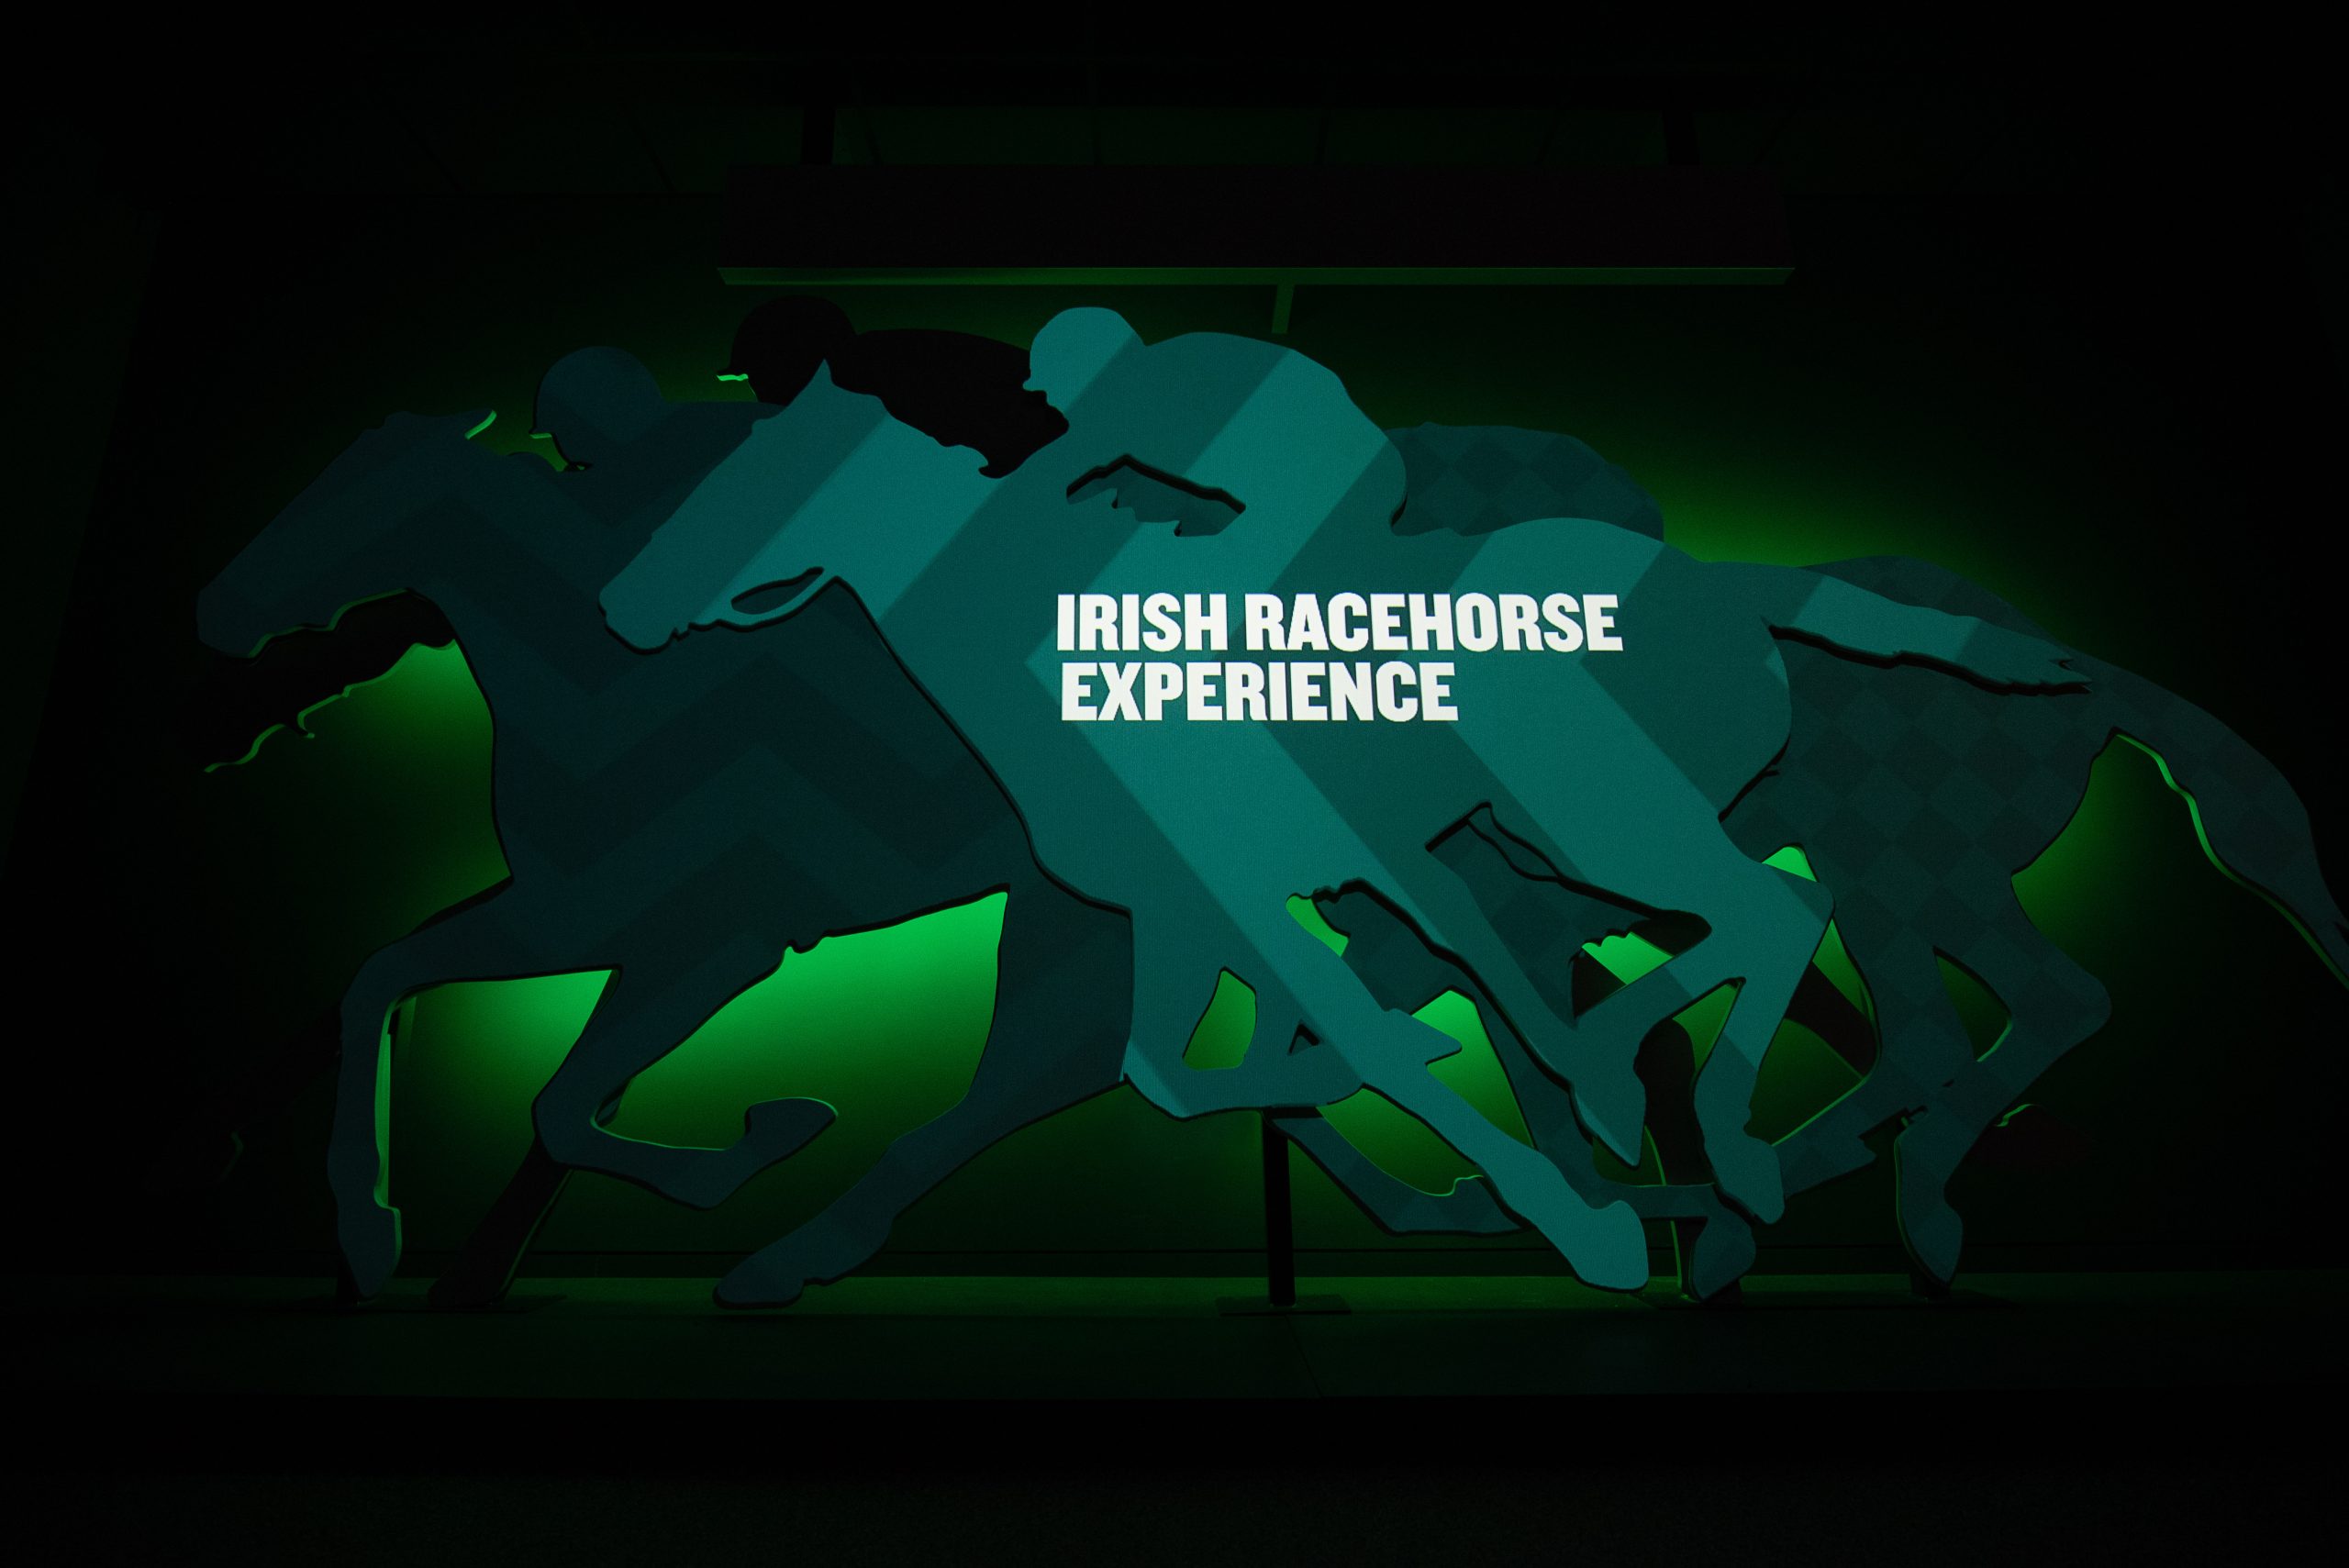 The Irish Racehorse Experience wins big at the Museum & Heritage Awards in London